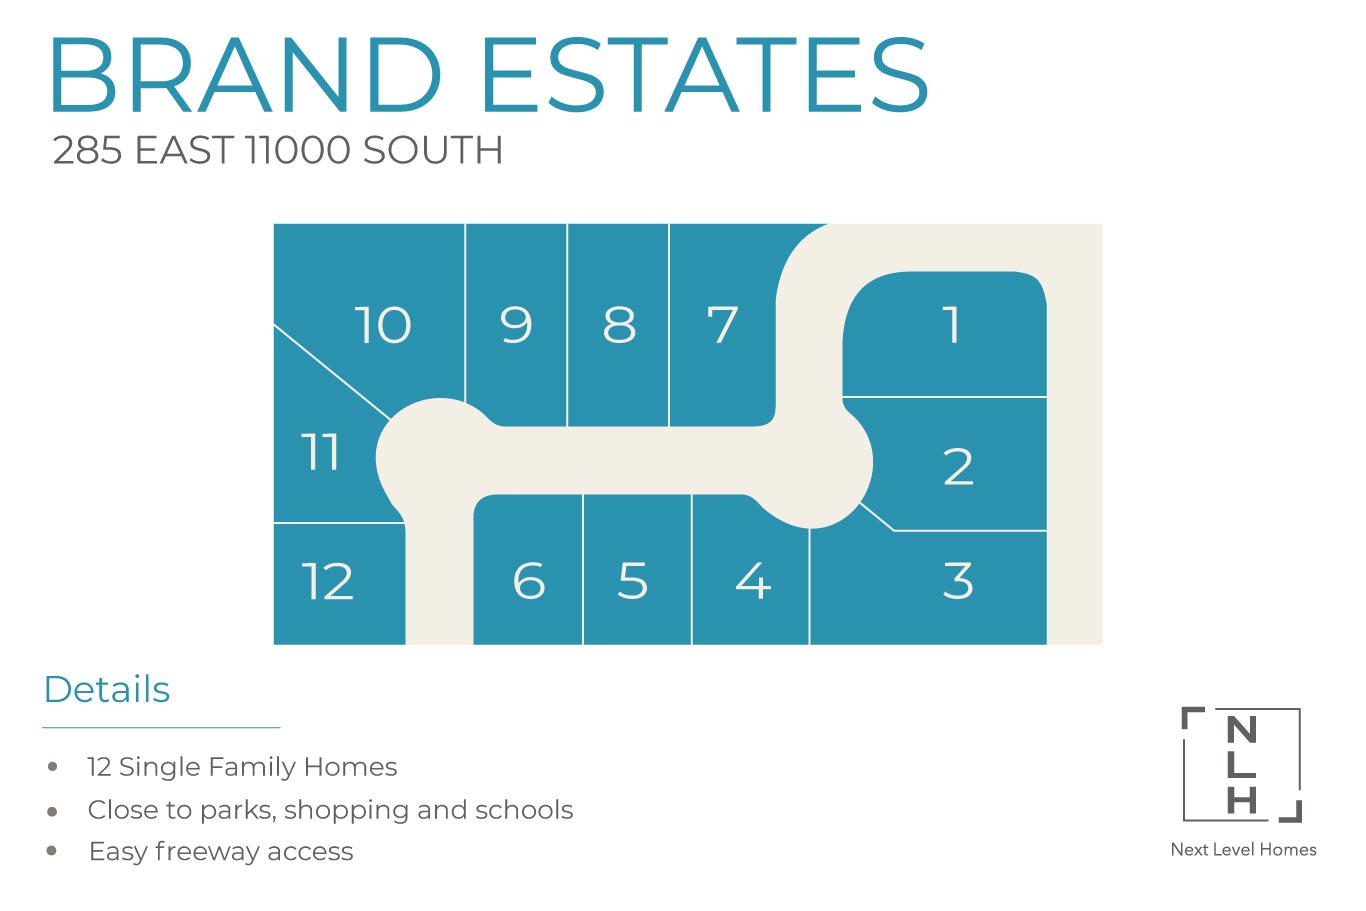 Brand Estates - A new community from Next Level Homes in Sandy Utah